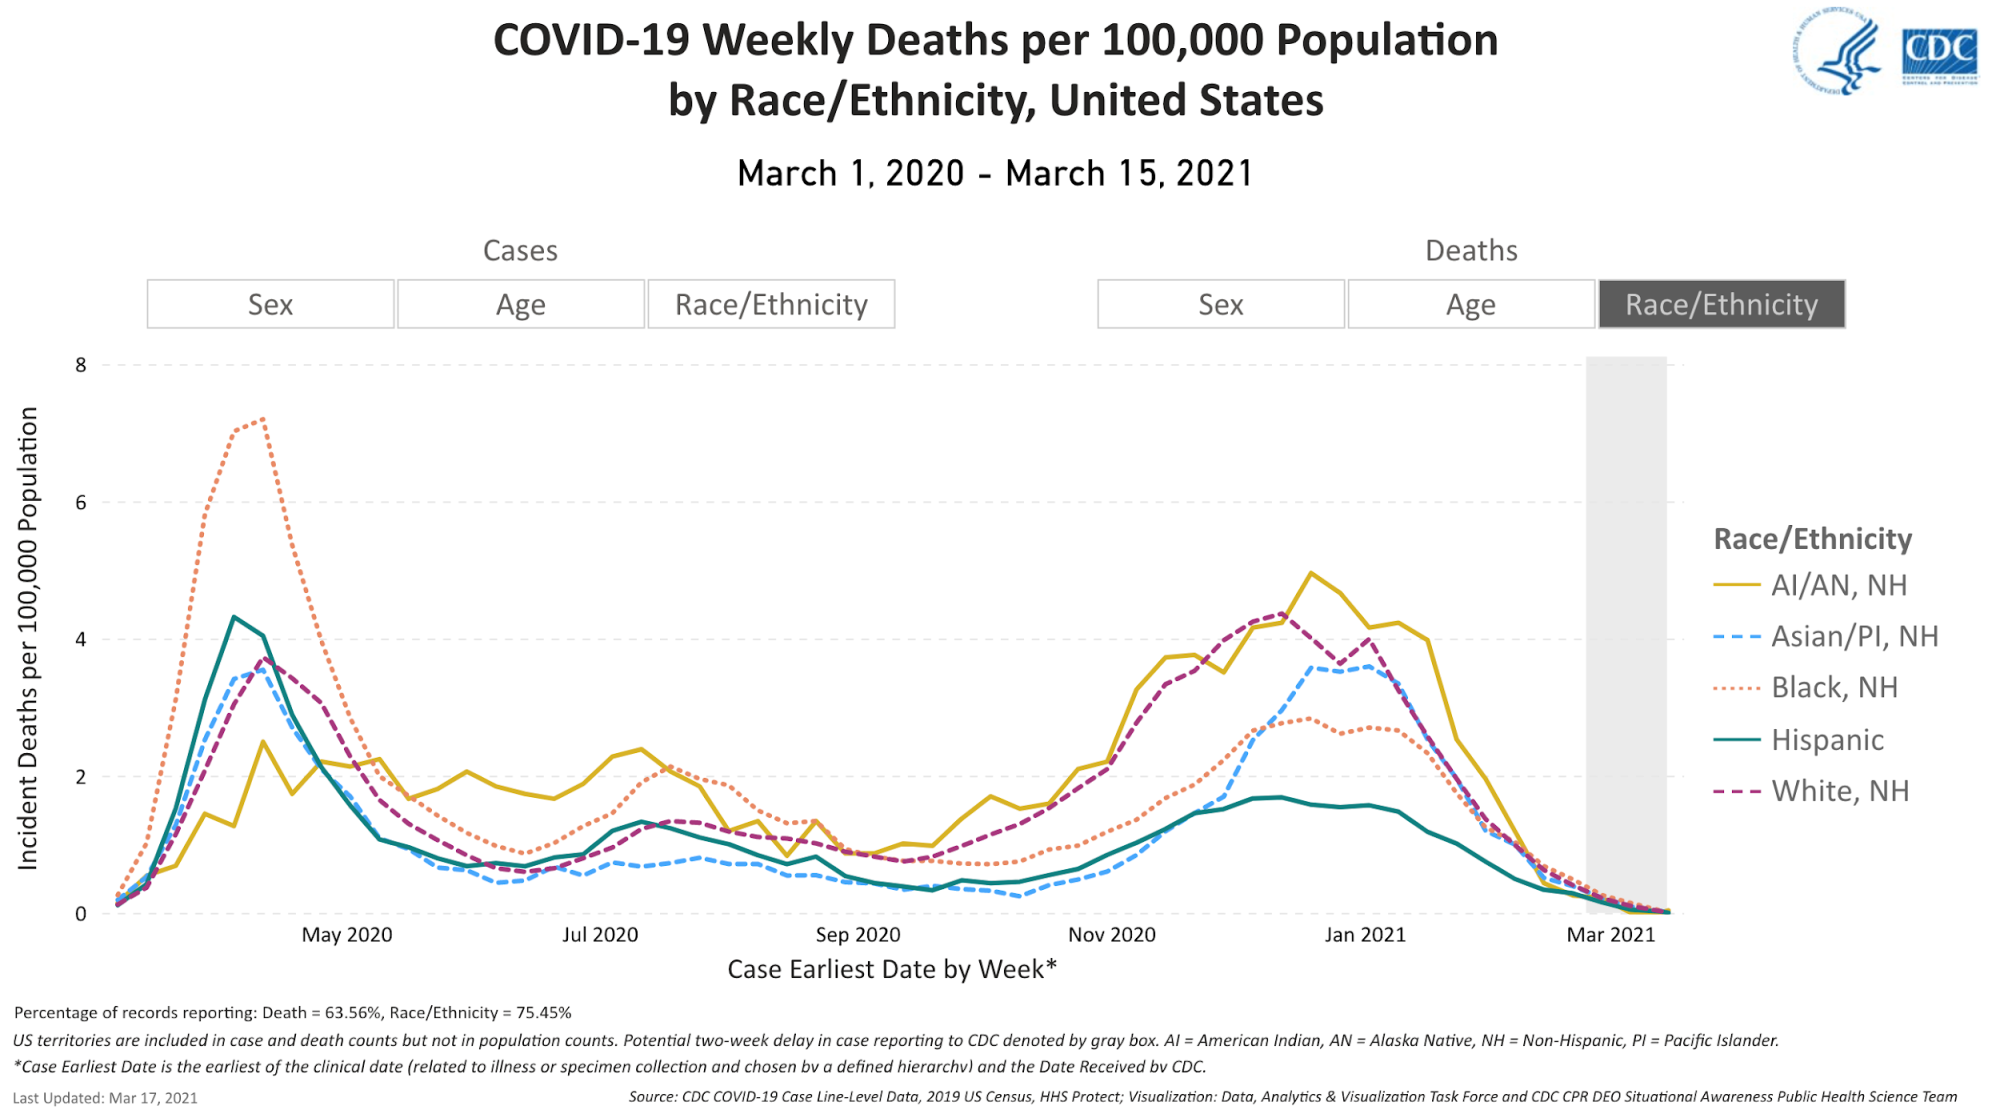 A line chart from the CDC site, showing COVID-19 weekly deaths per 100,000 population by race/ethnicity in the United States. The chart gives options for viewing cases instead, and for seeing the chart by sex or age rather than race/ethnicity. The chart shows reported data for March 1, 2020 through March 15, 2021.